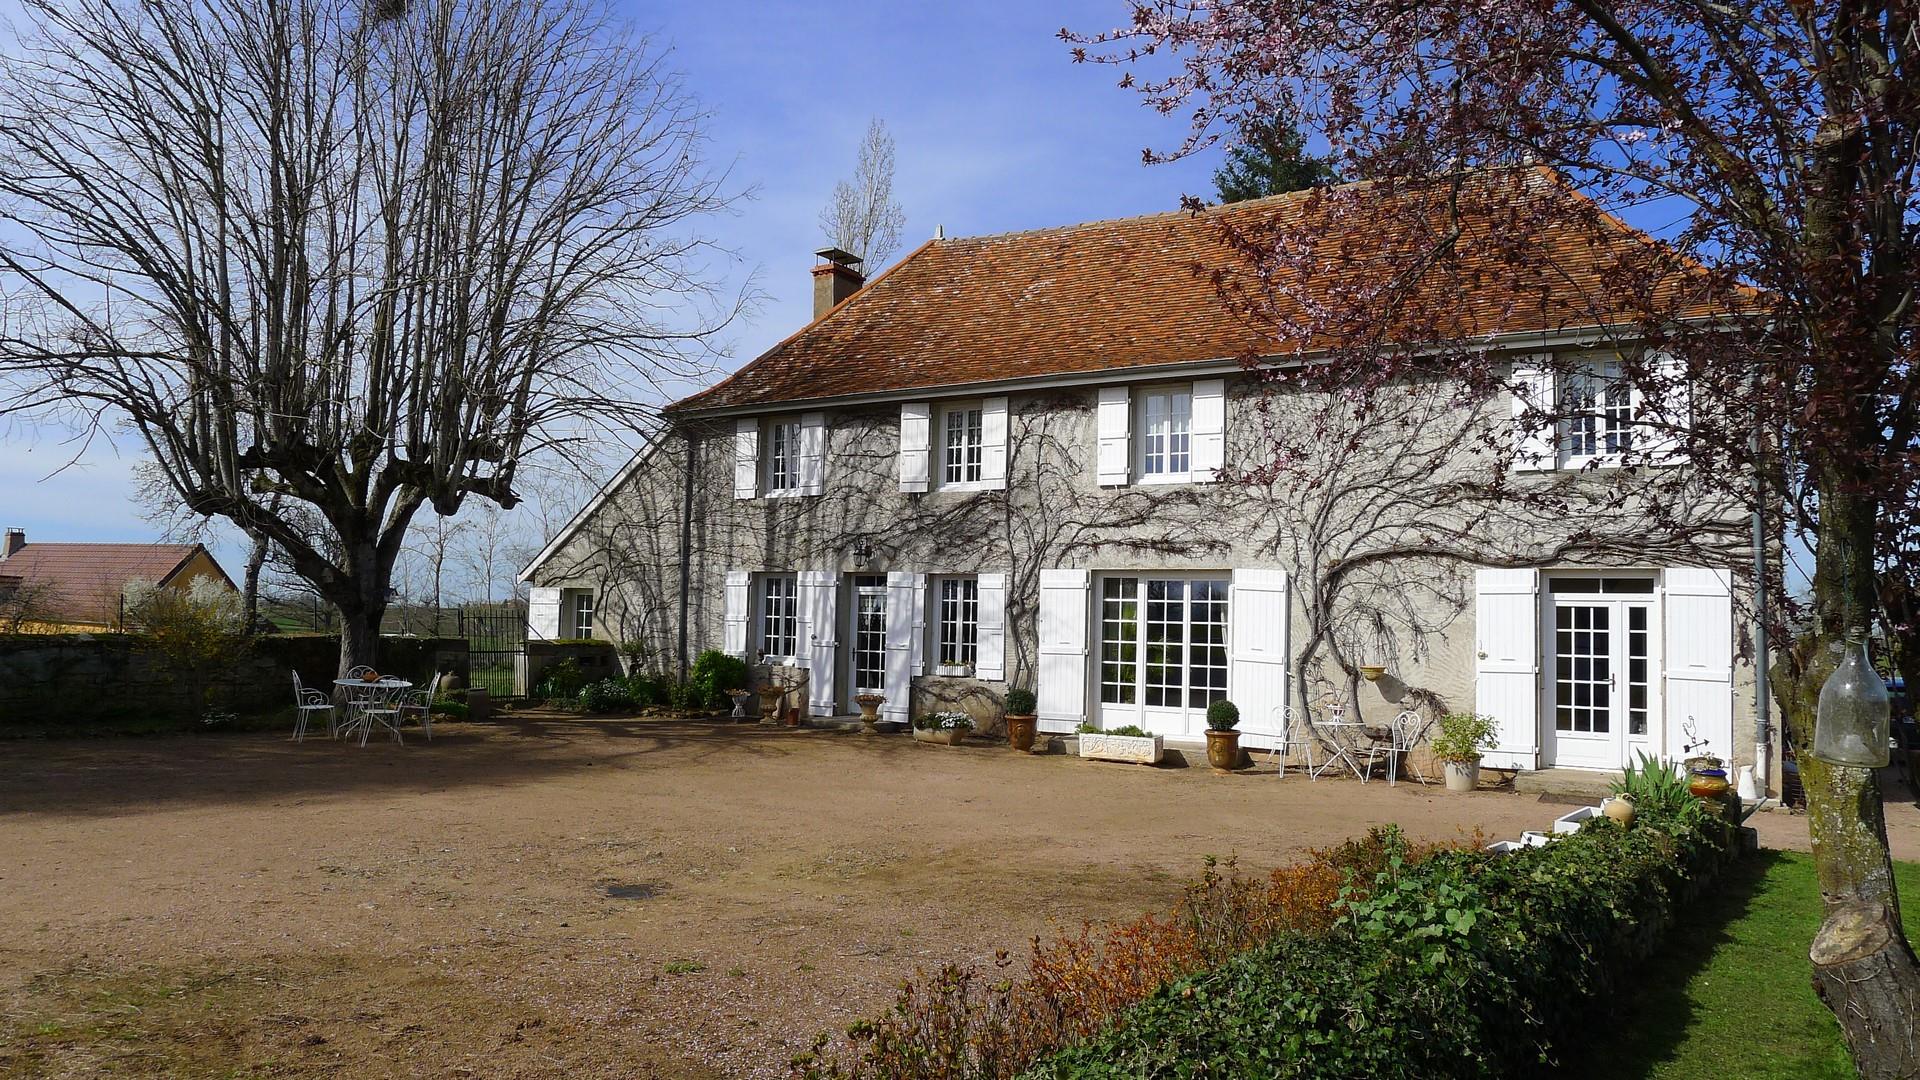 Old cottage-style farmhouse